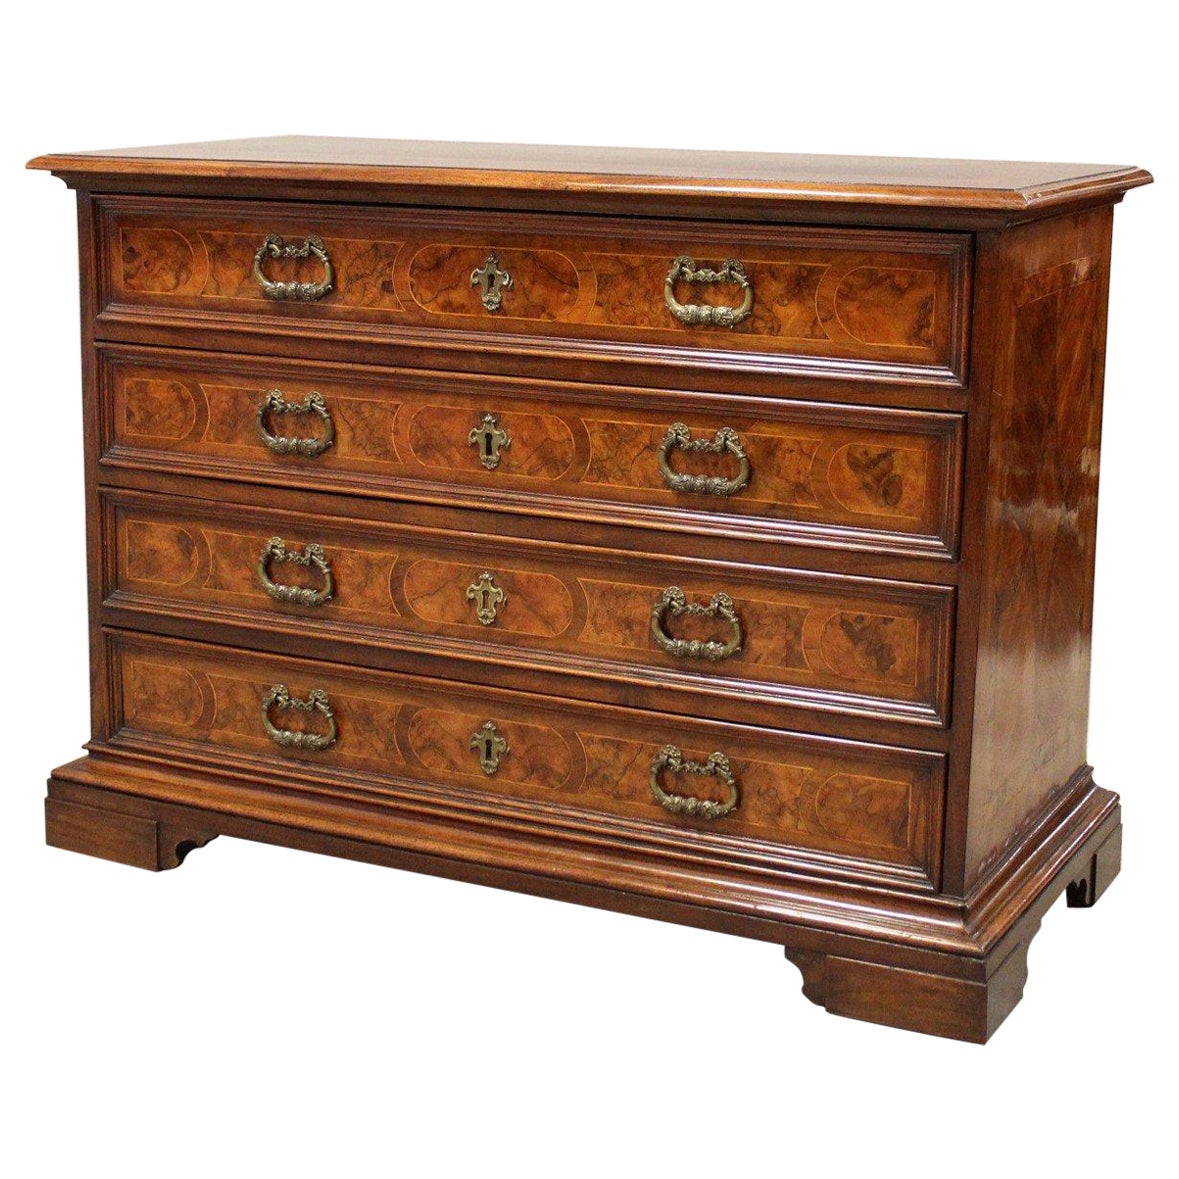 18th Century Italian Walnut Commode with Four Drawers and Ornate Hardware For Sale